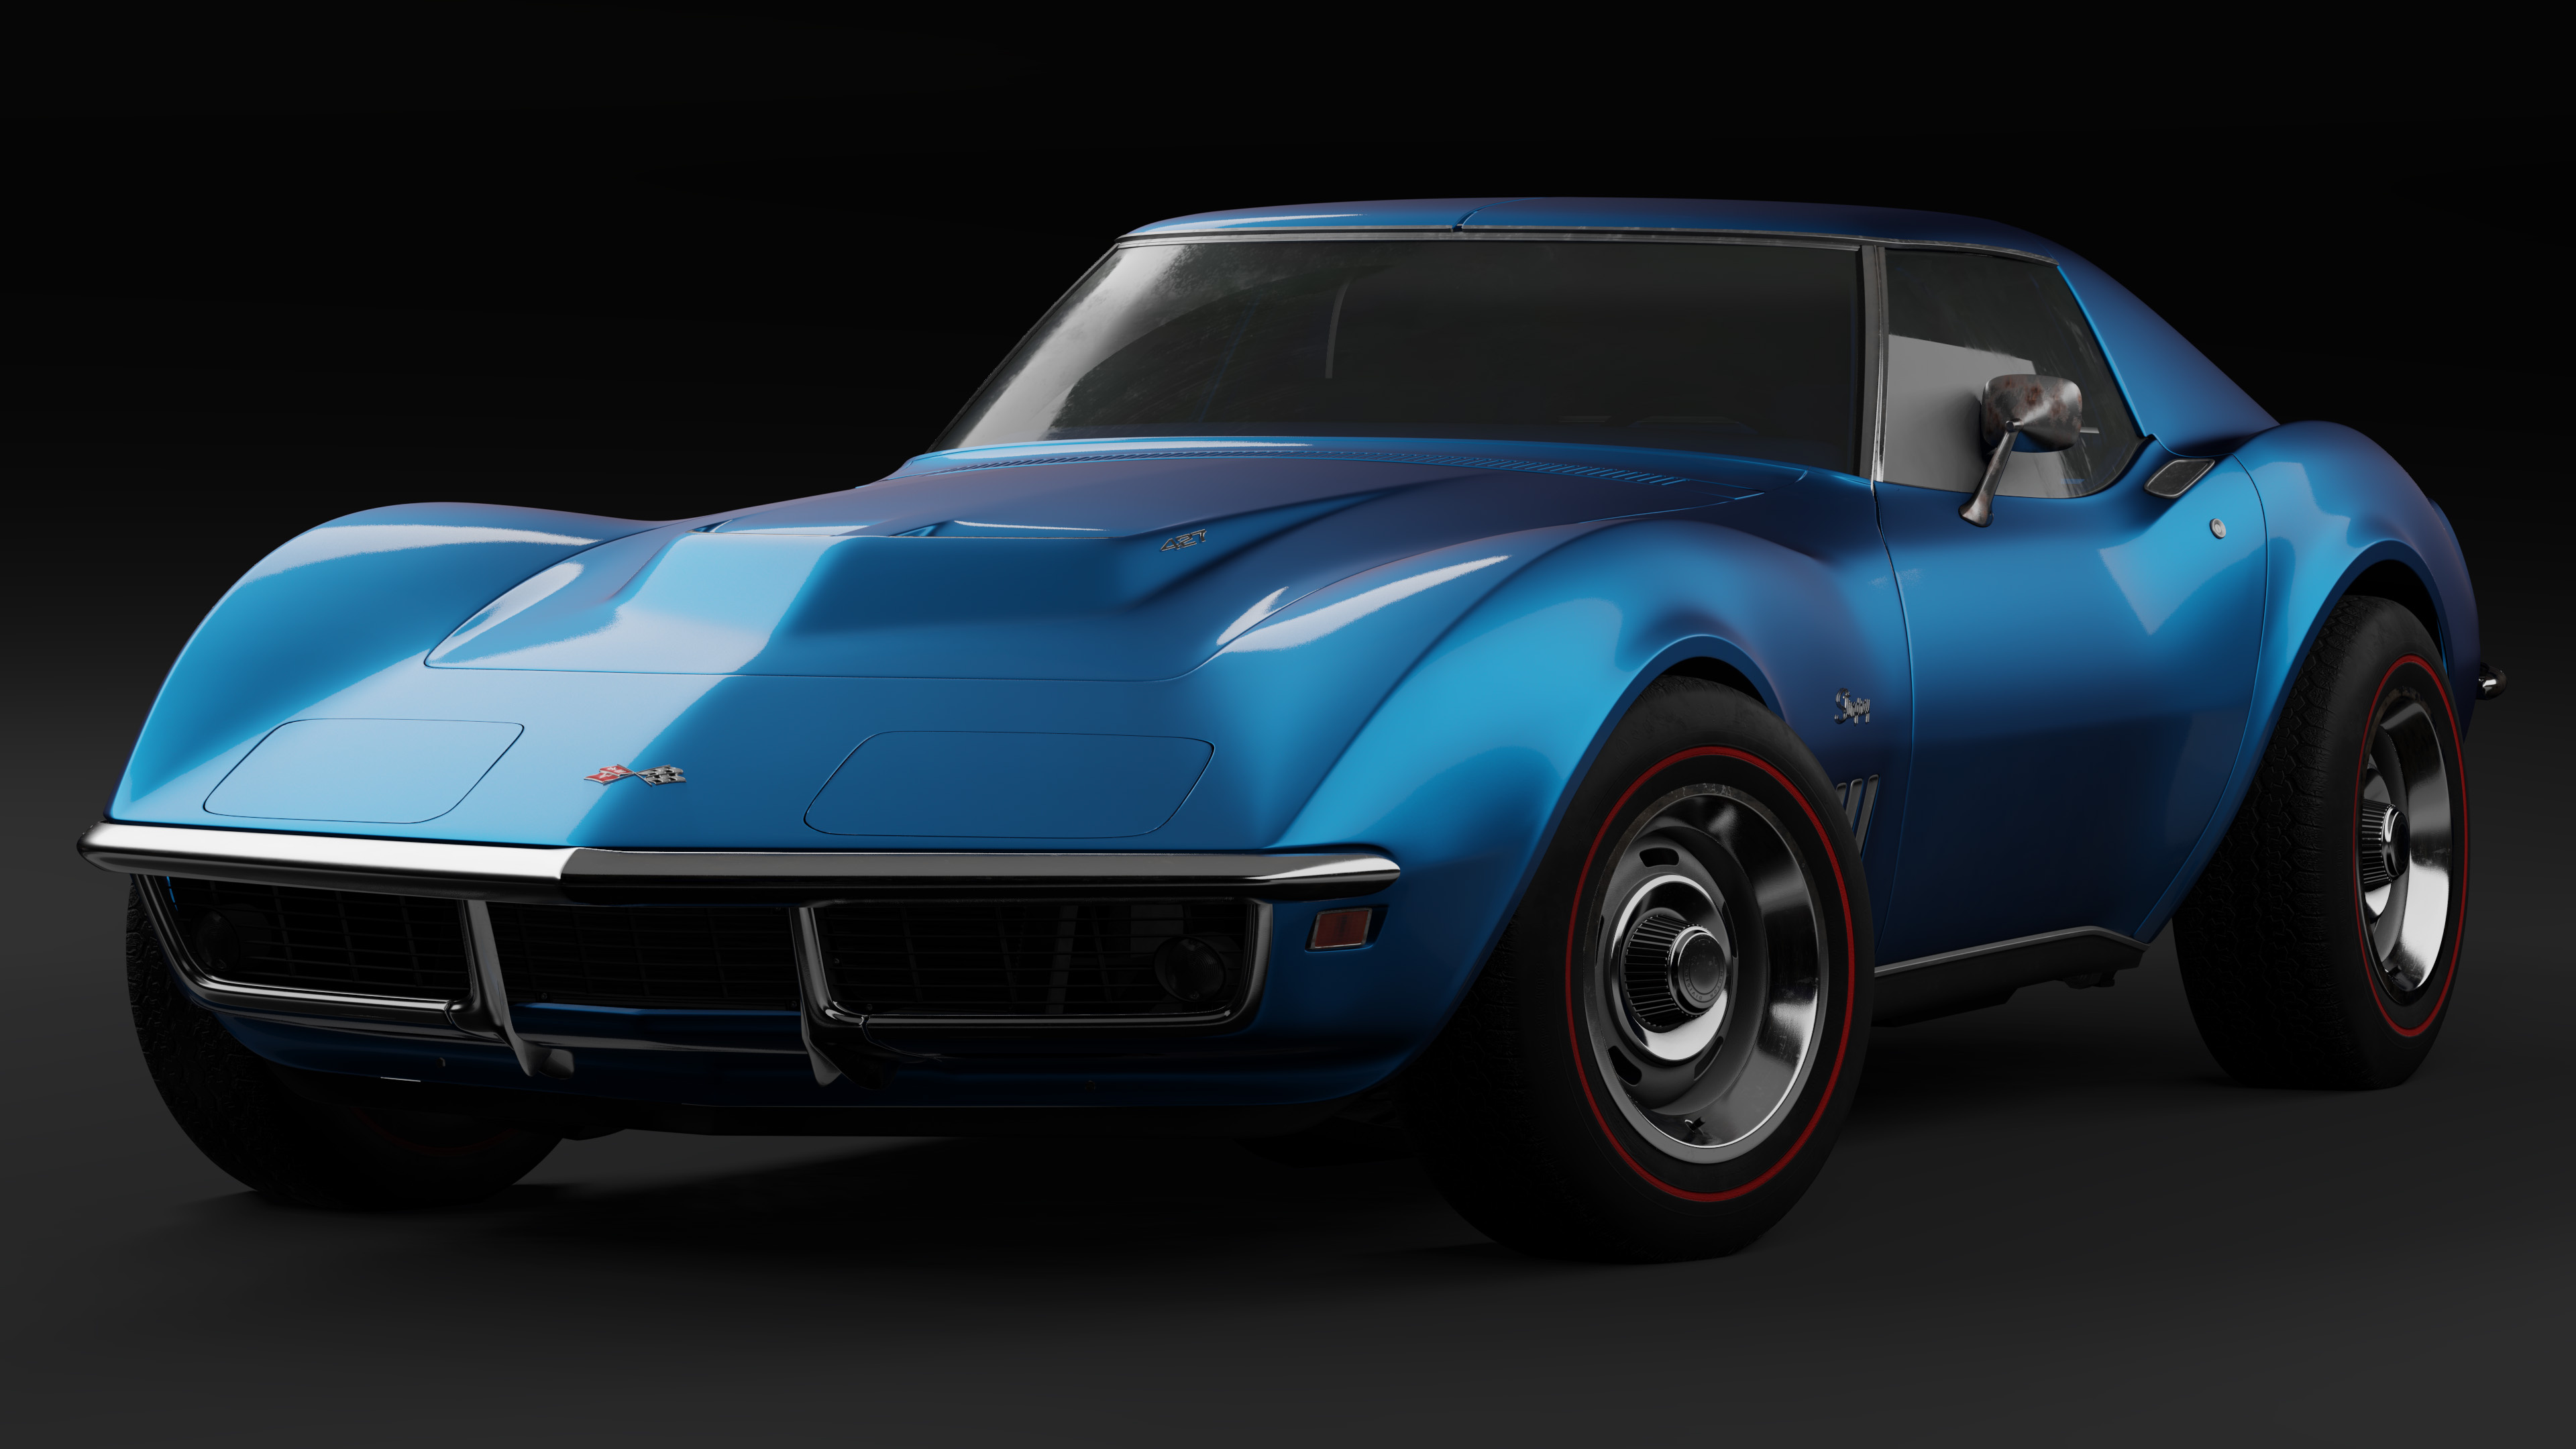 Corvette: Chevrolet C3 Stingray 1969, A car that was patterned after the Mako Shark II vehicle. 3840x2160 4K Background.